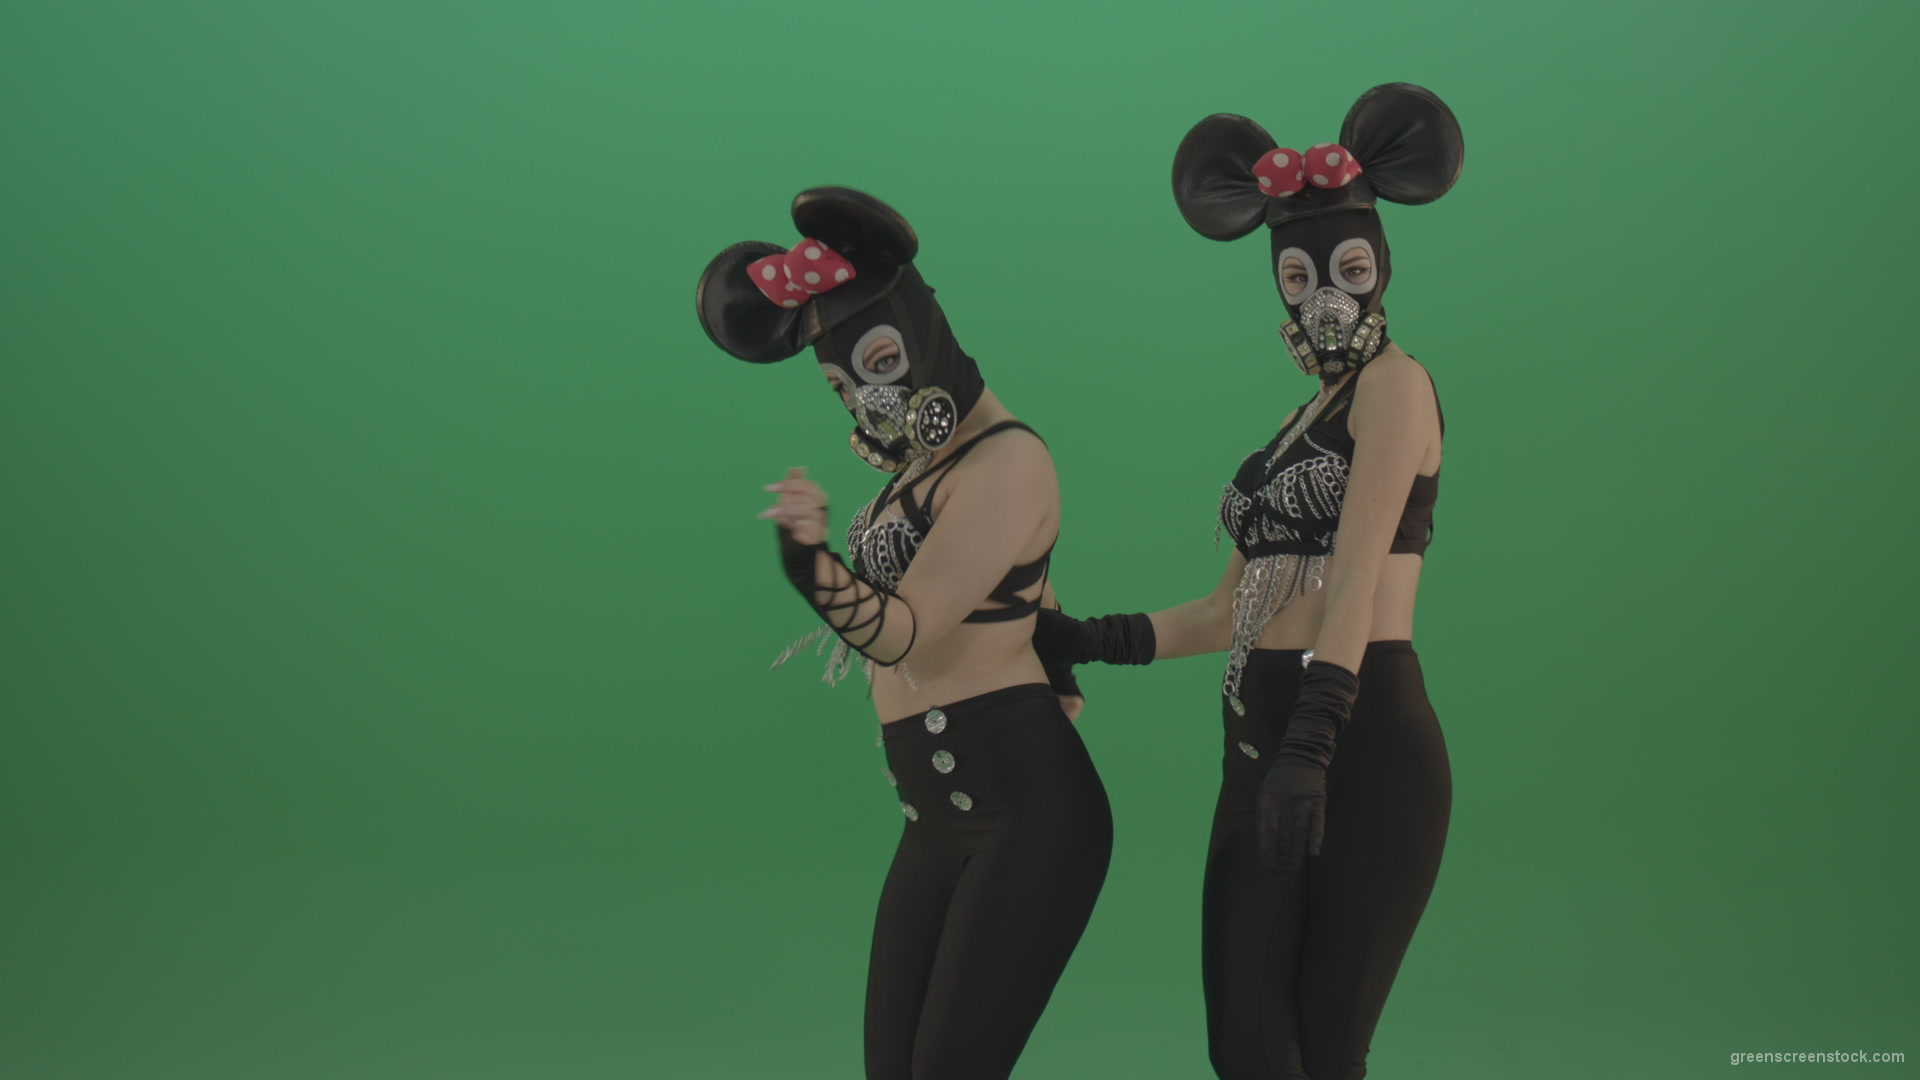 Girls-dressed-Mickey-Mouse-dance-well-on-green-screen_006 Green Screen Stock